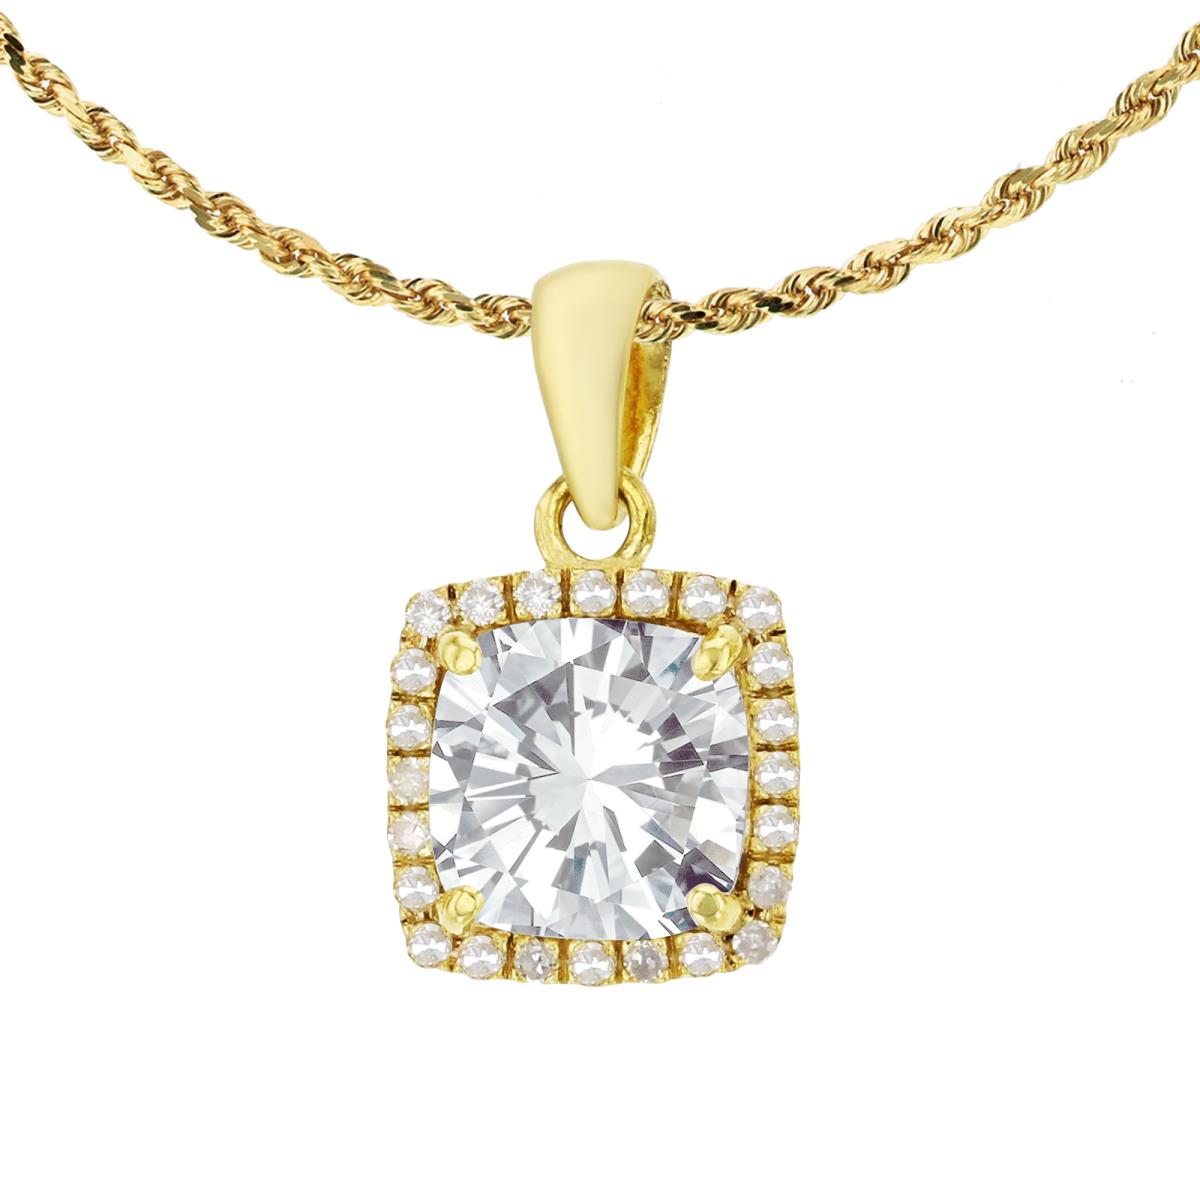 14K Yellow Gold 7mm Cushion White Topaz & 0.12 CTTW Diamond Halo 18" Rope Chain Necklace